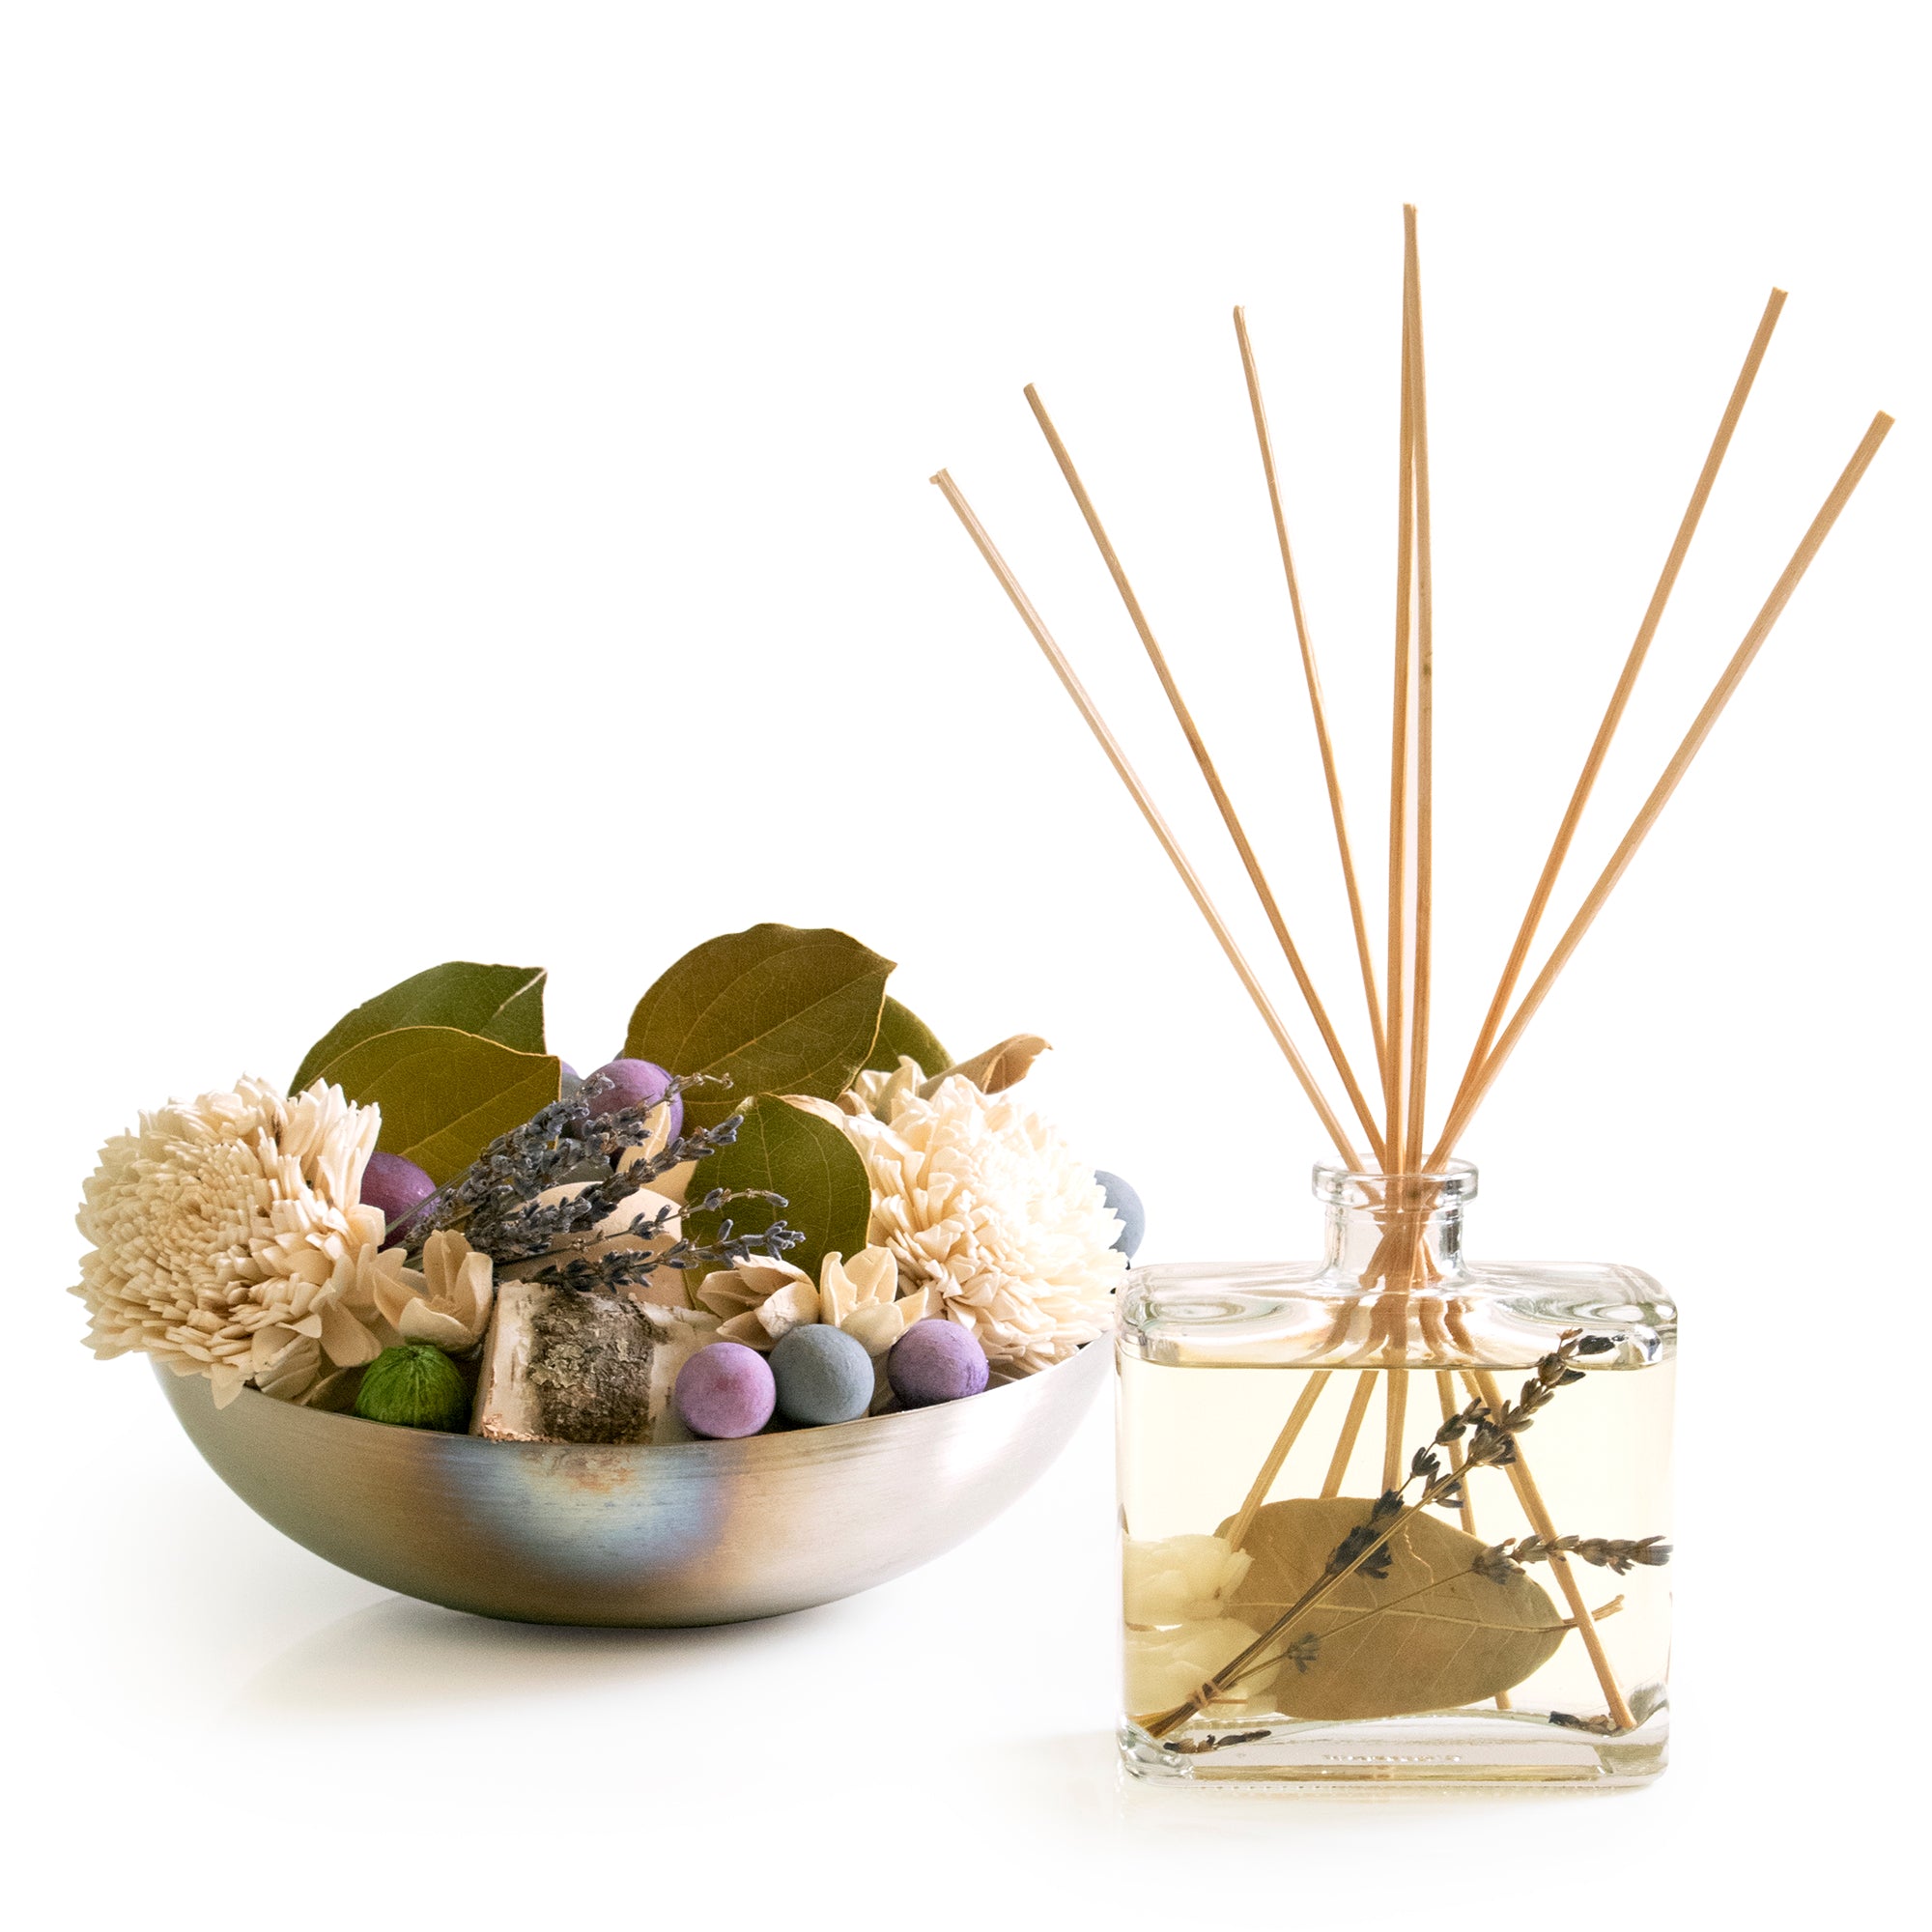 Amber Lavender Reed Diffuser